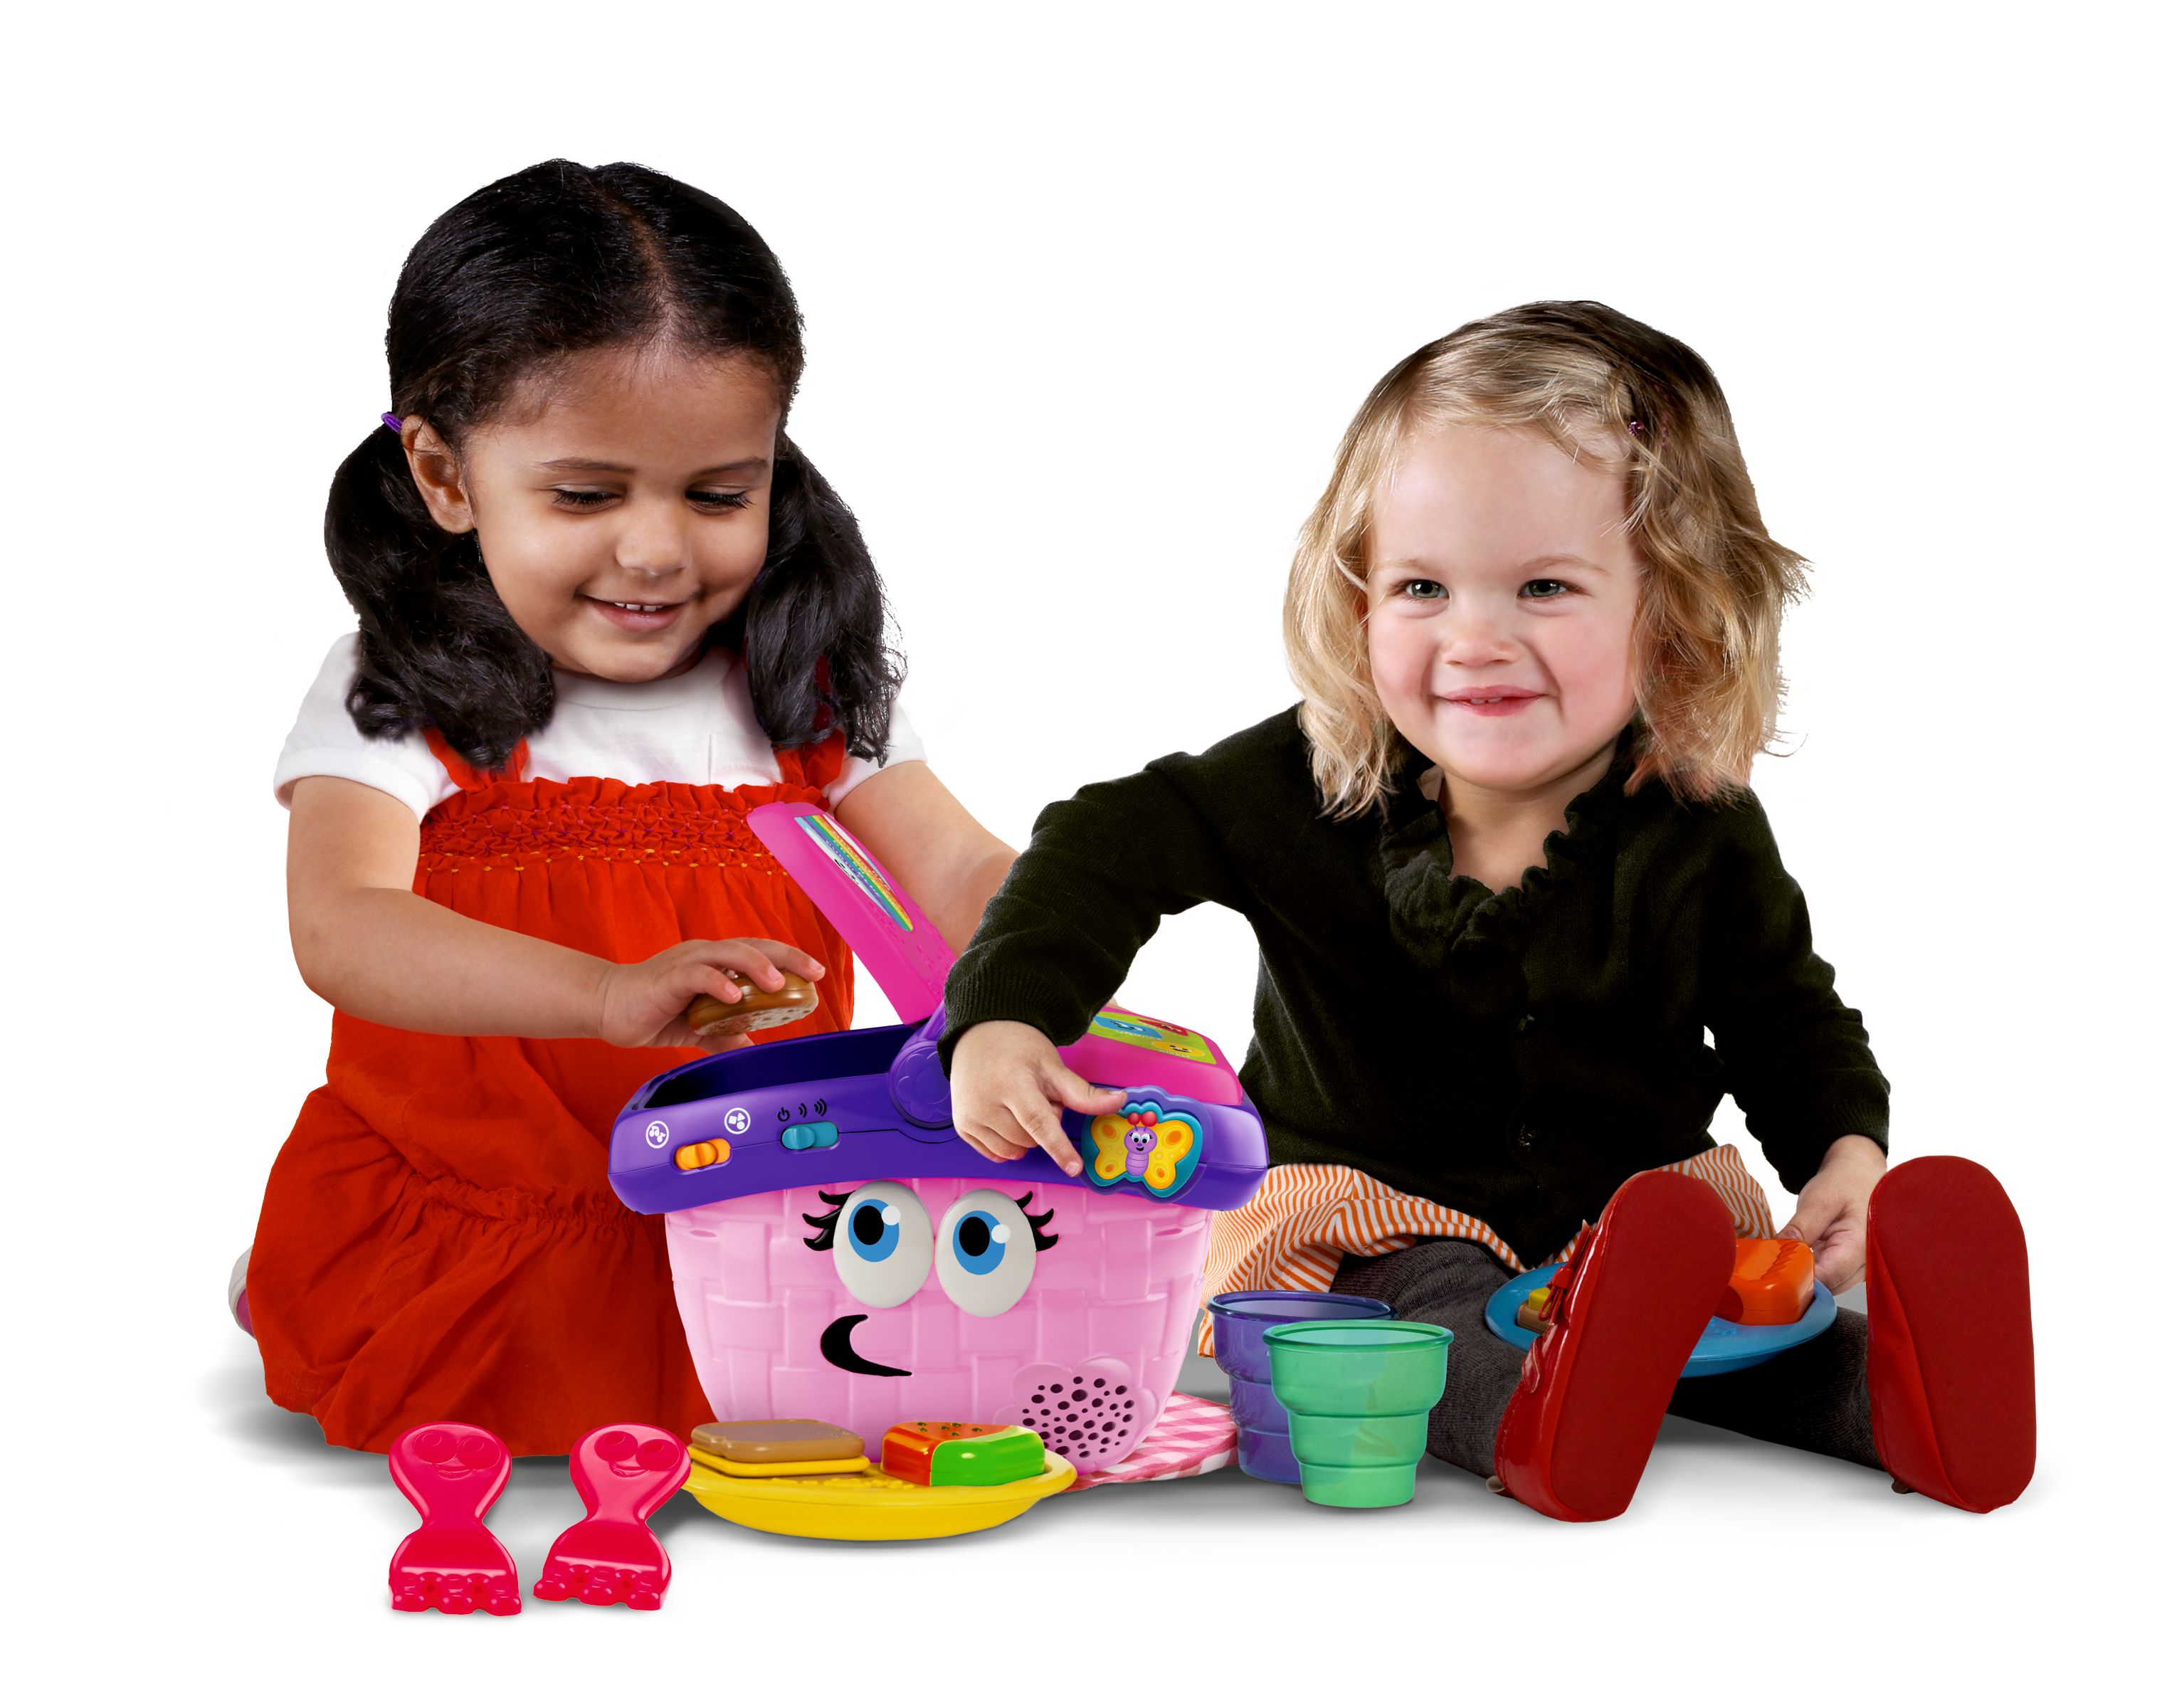 LeapFrog Shapes and Sharing Picnic Basket, Role-Play Toy for Kids - image 2 of 6